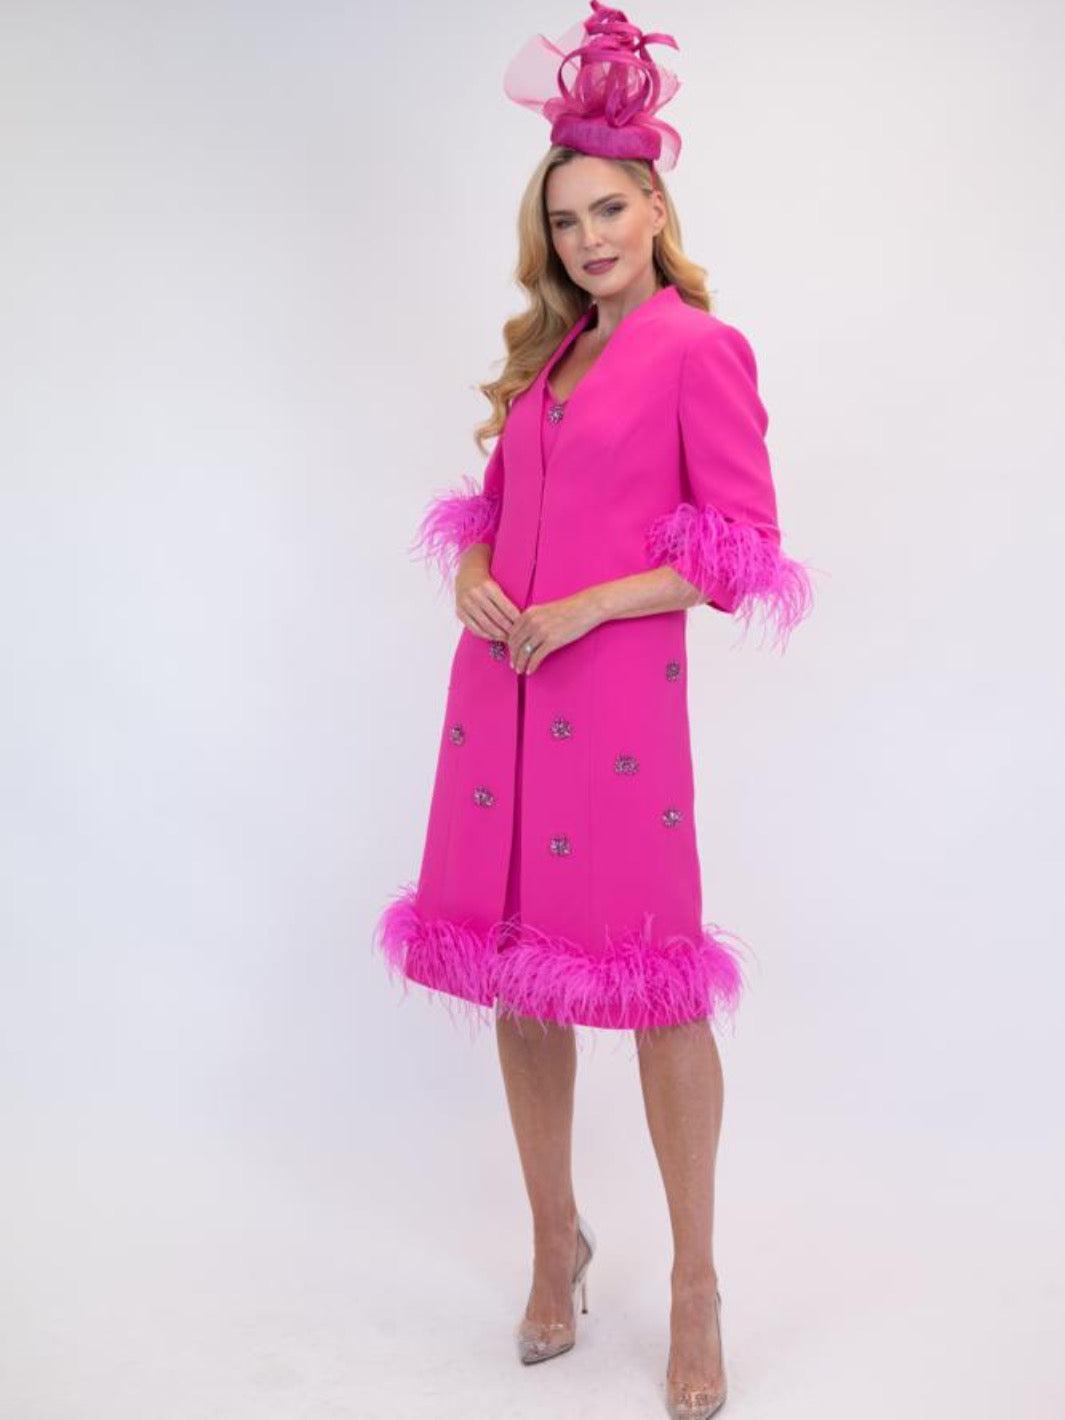 Ophelia Melita Boa Dress/Coat in Cerise-Mother of the bride- mother of the groom -Nicola Ross